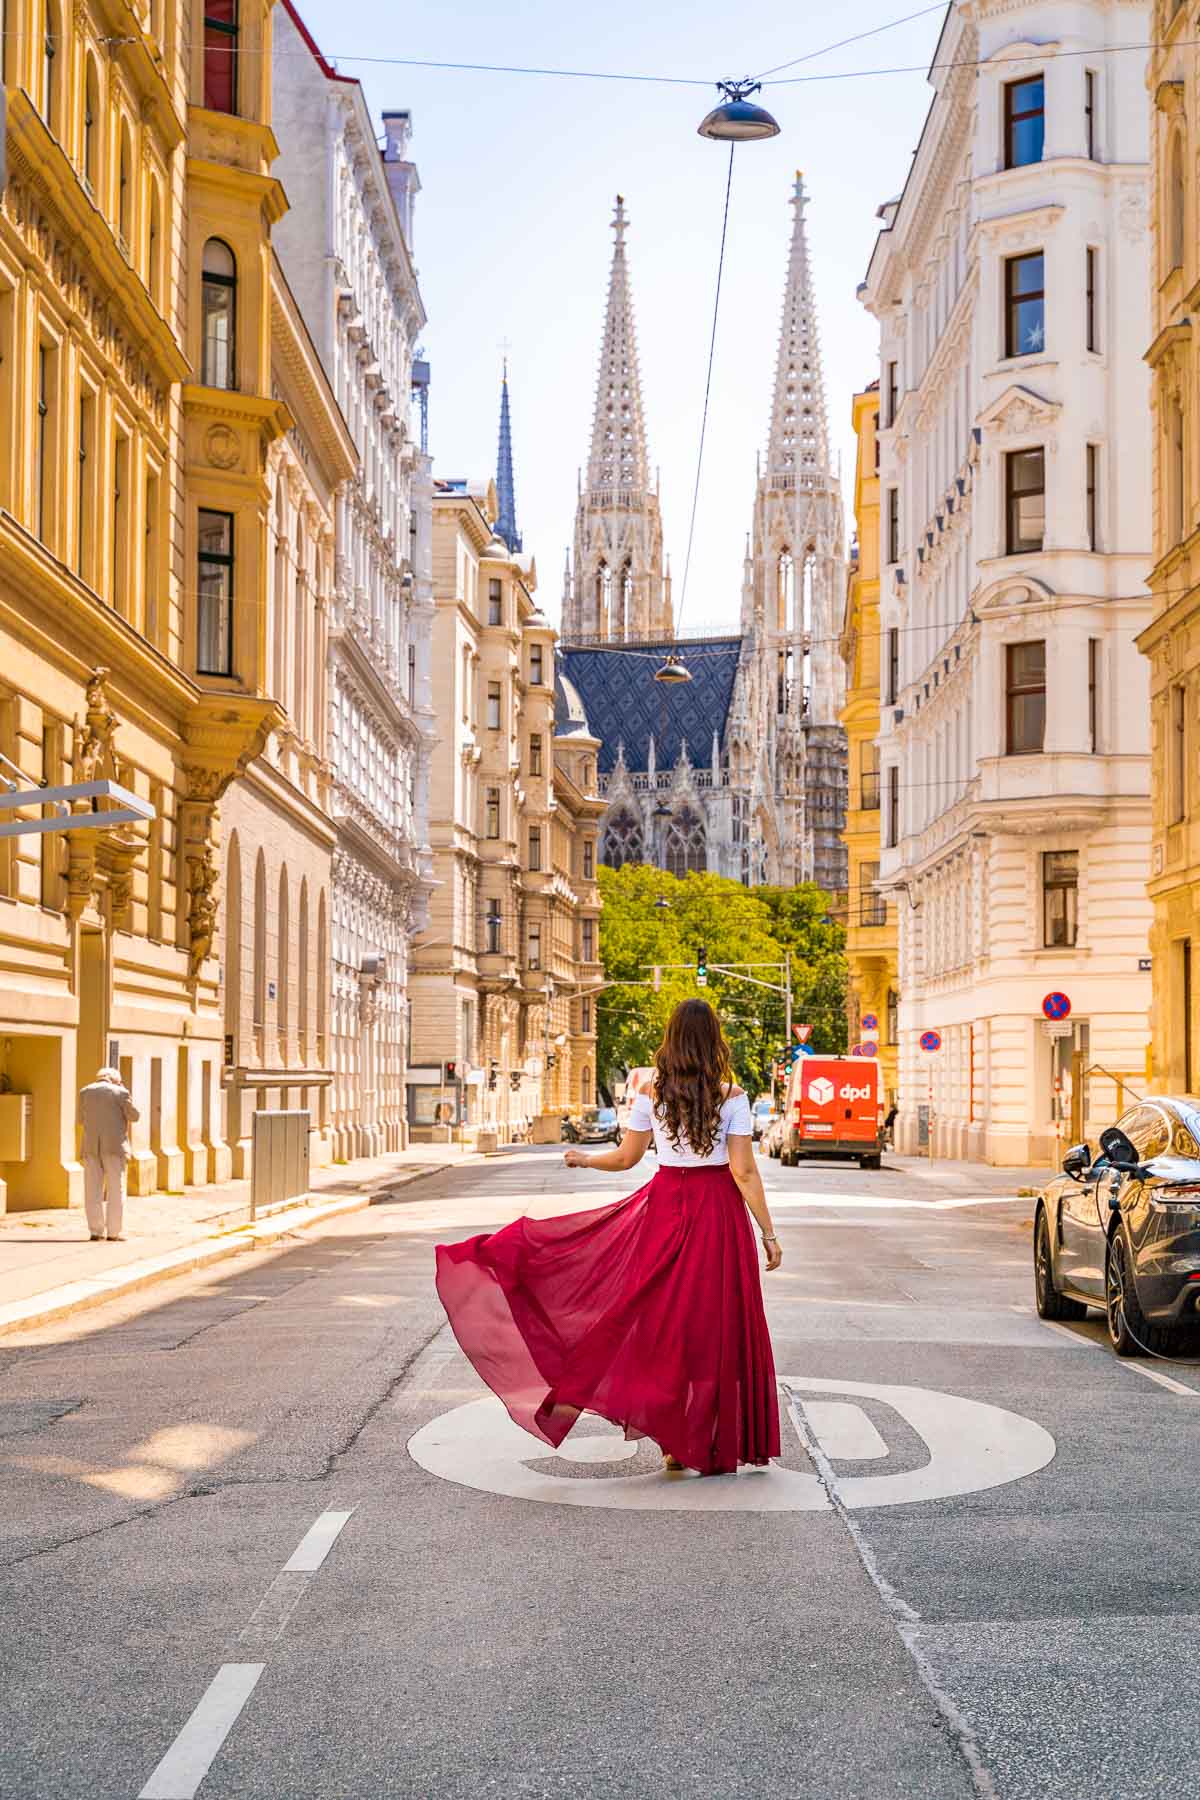 Girl in a red dress on a street with Votivkirche in the background